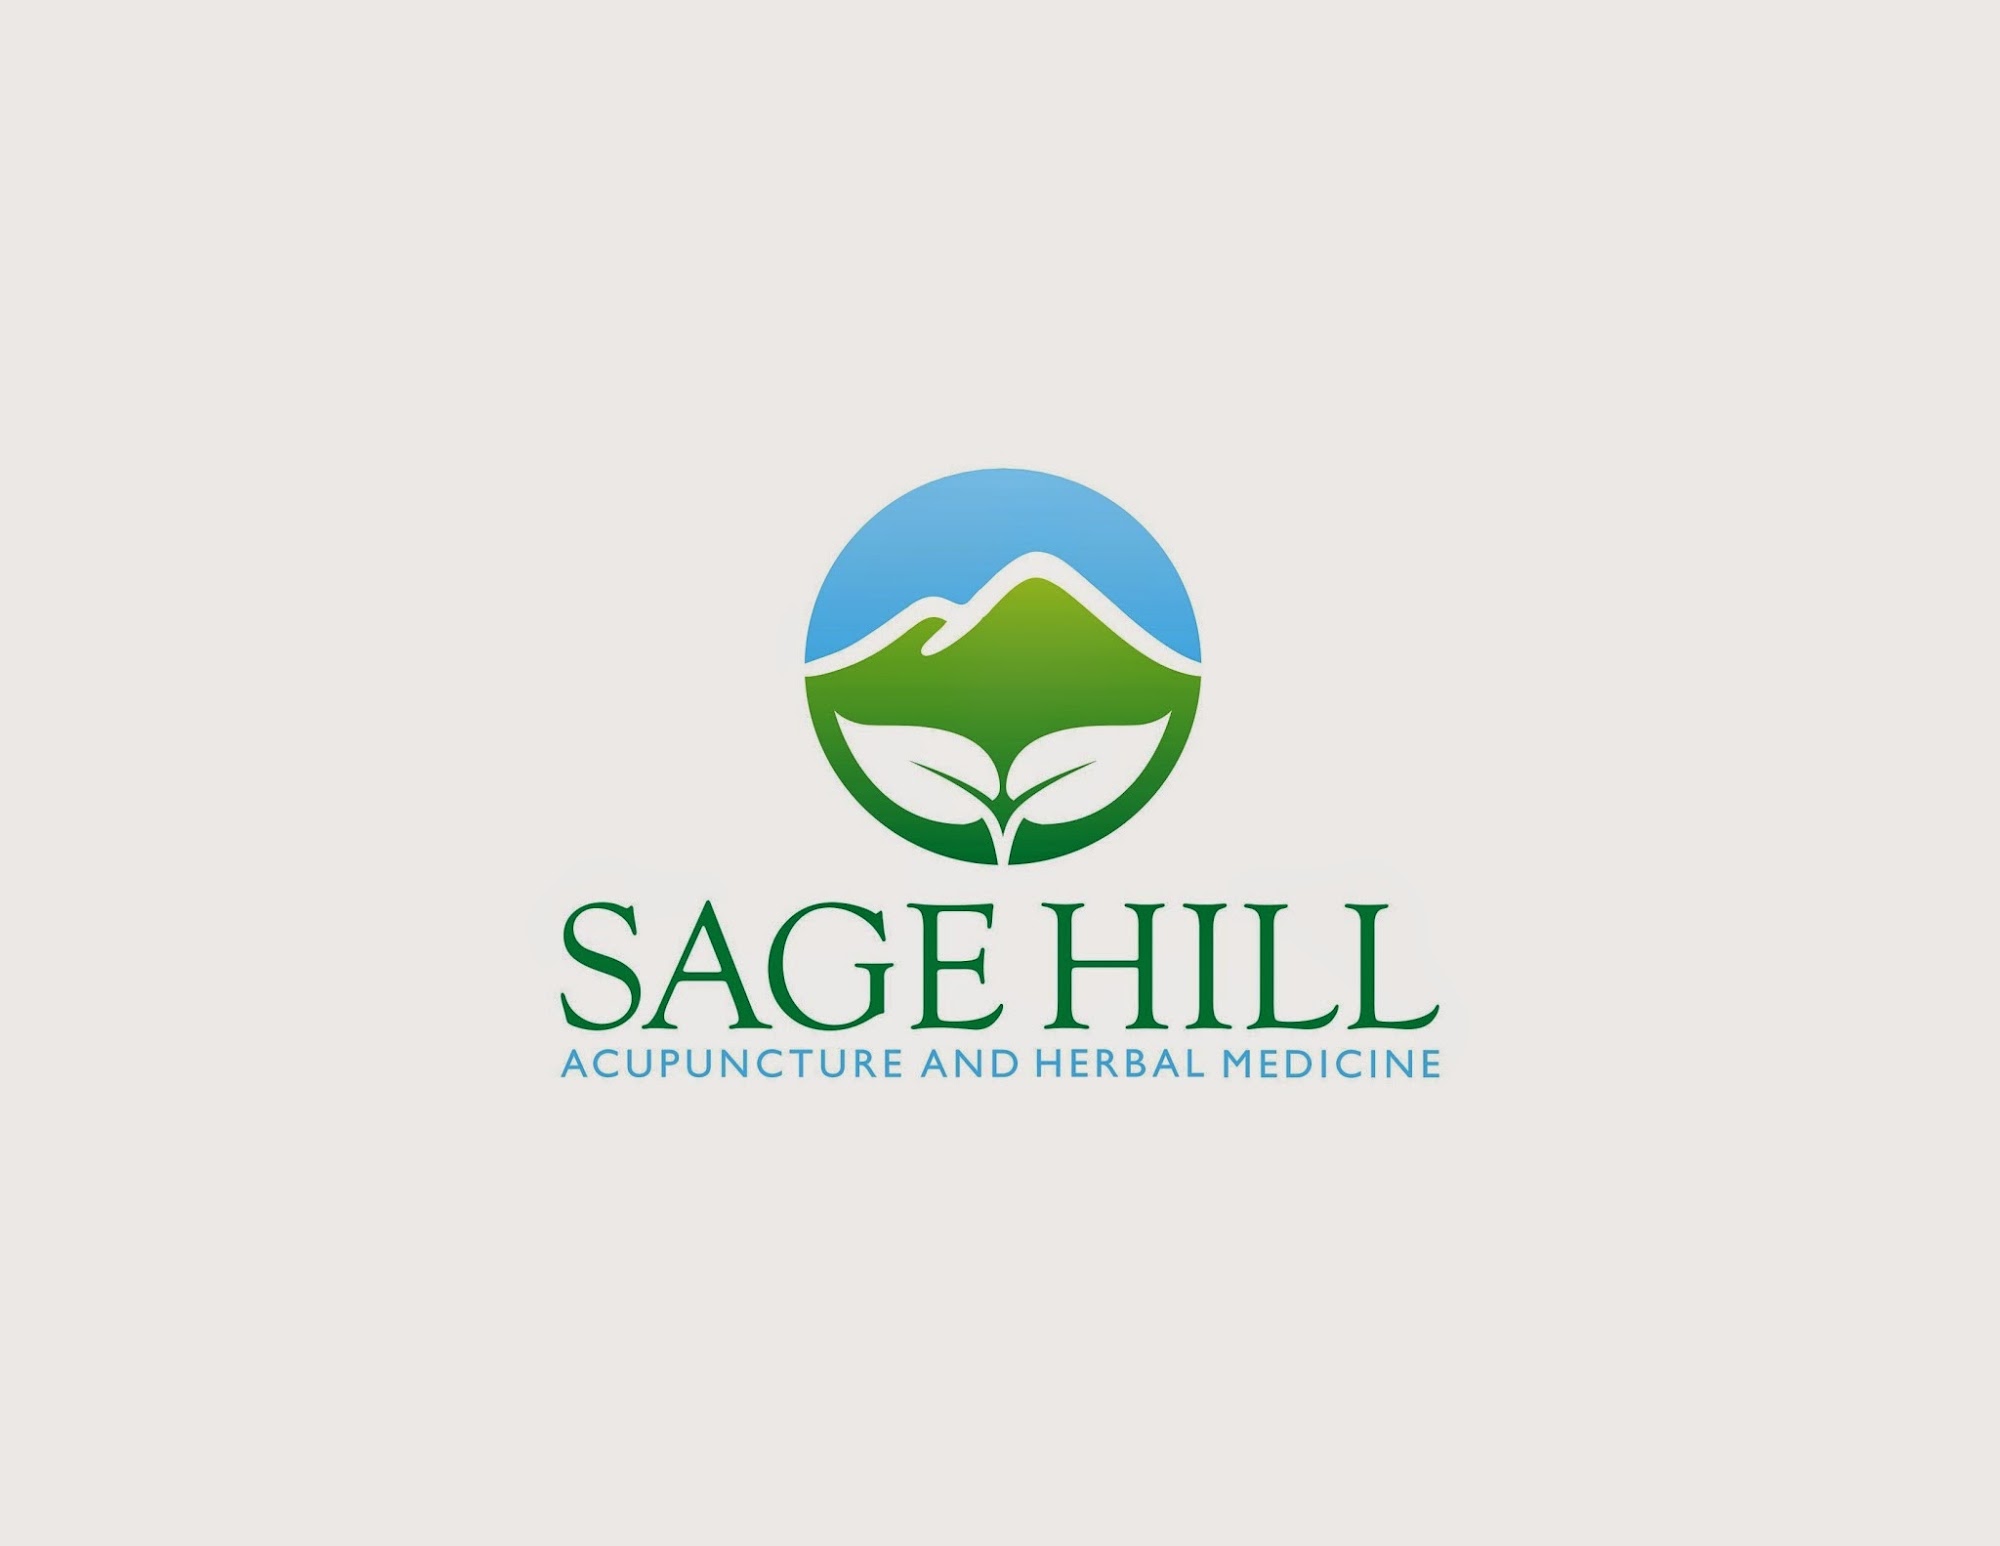 Sage Hill Acupuncture and Herbal Medicine